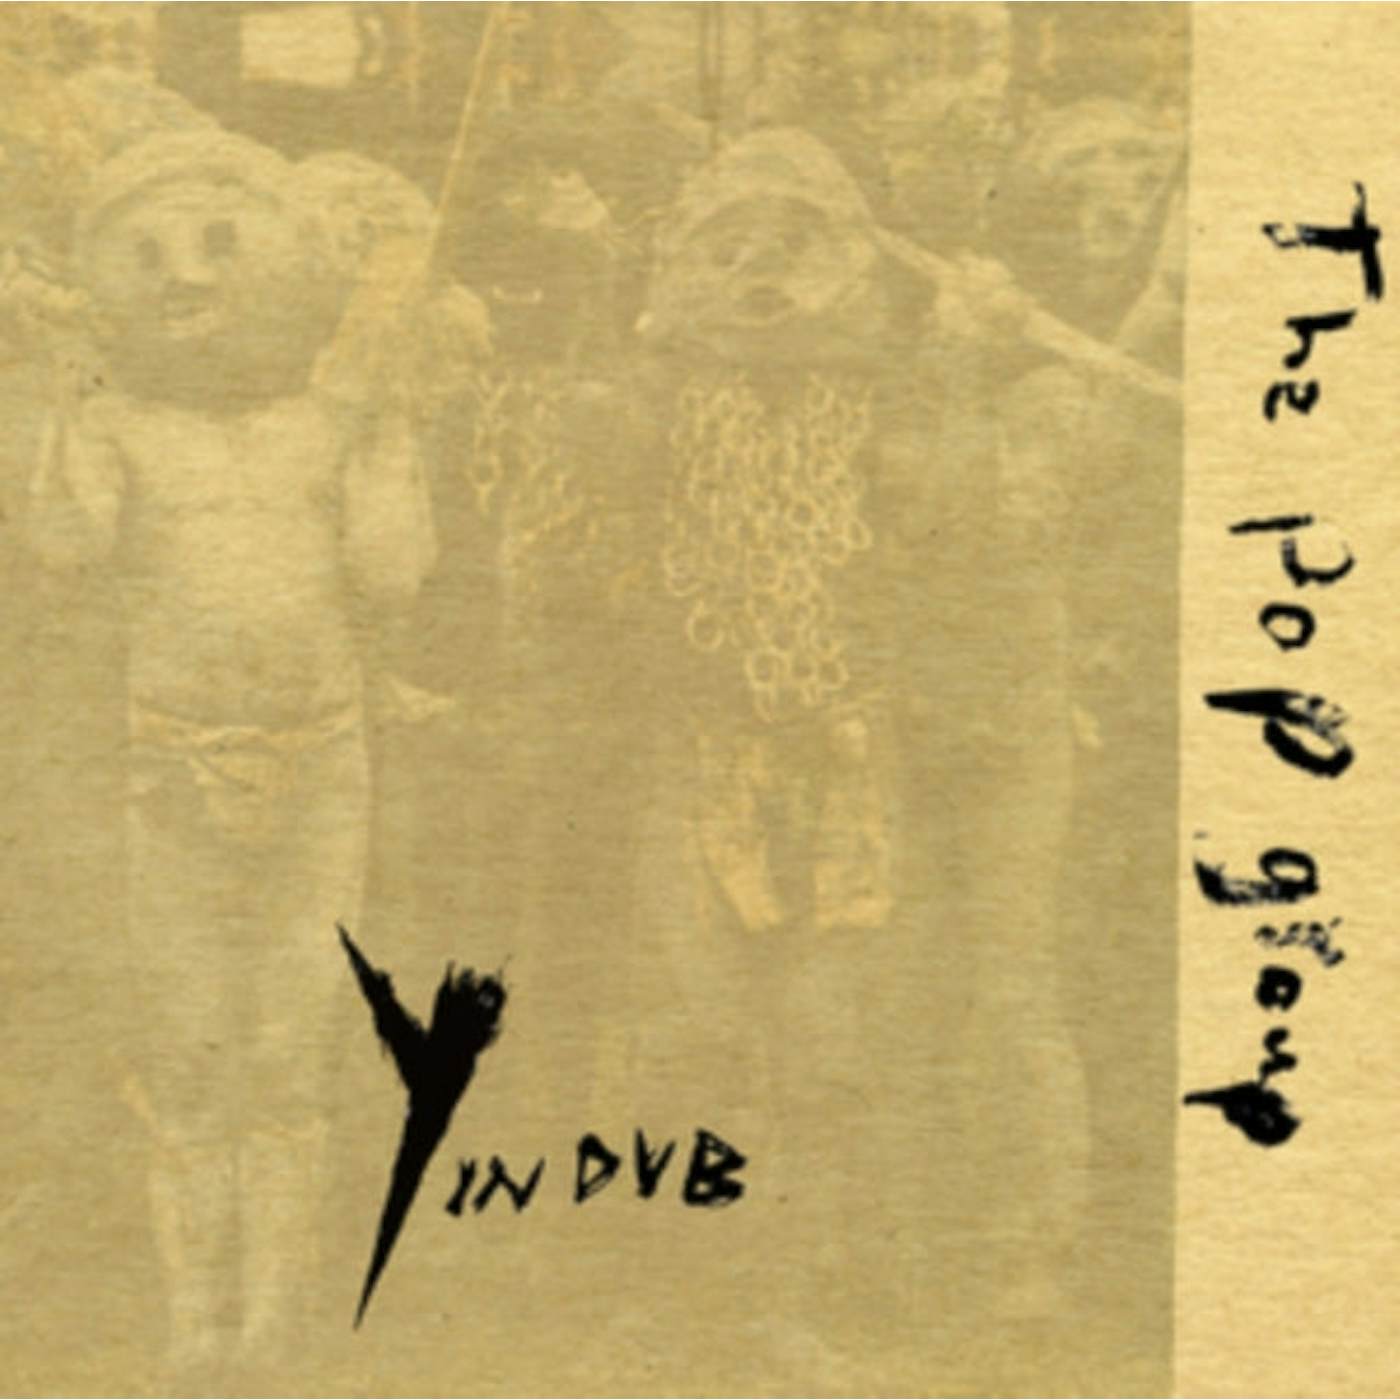 The Pop Group CD - Y In Dub